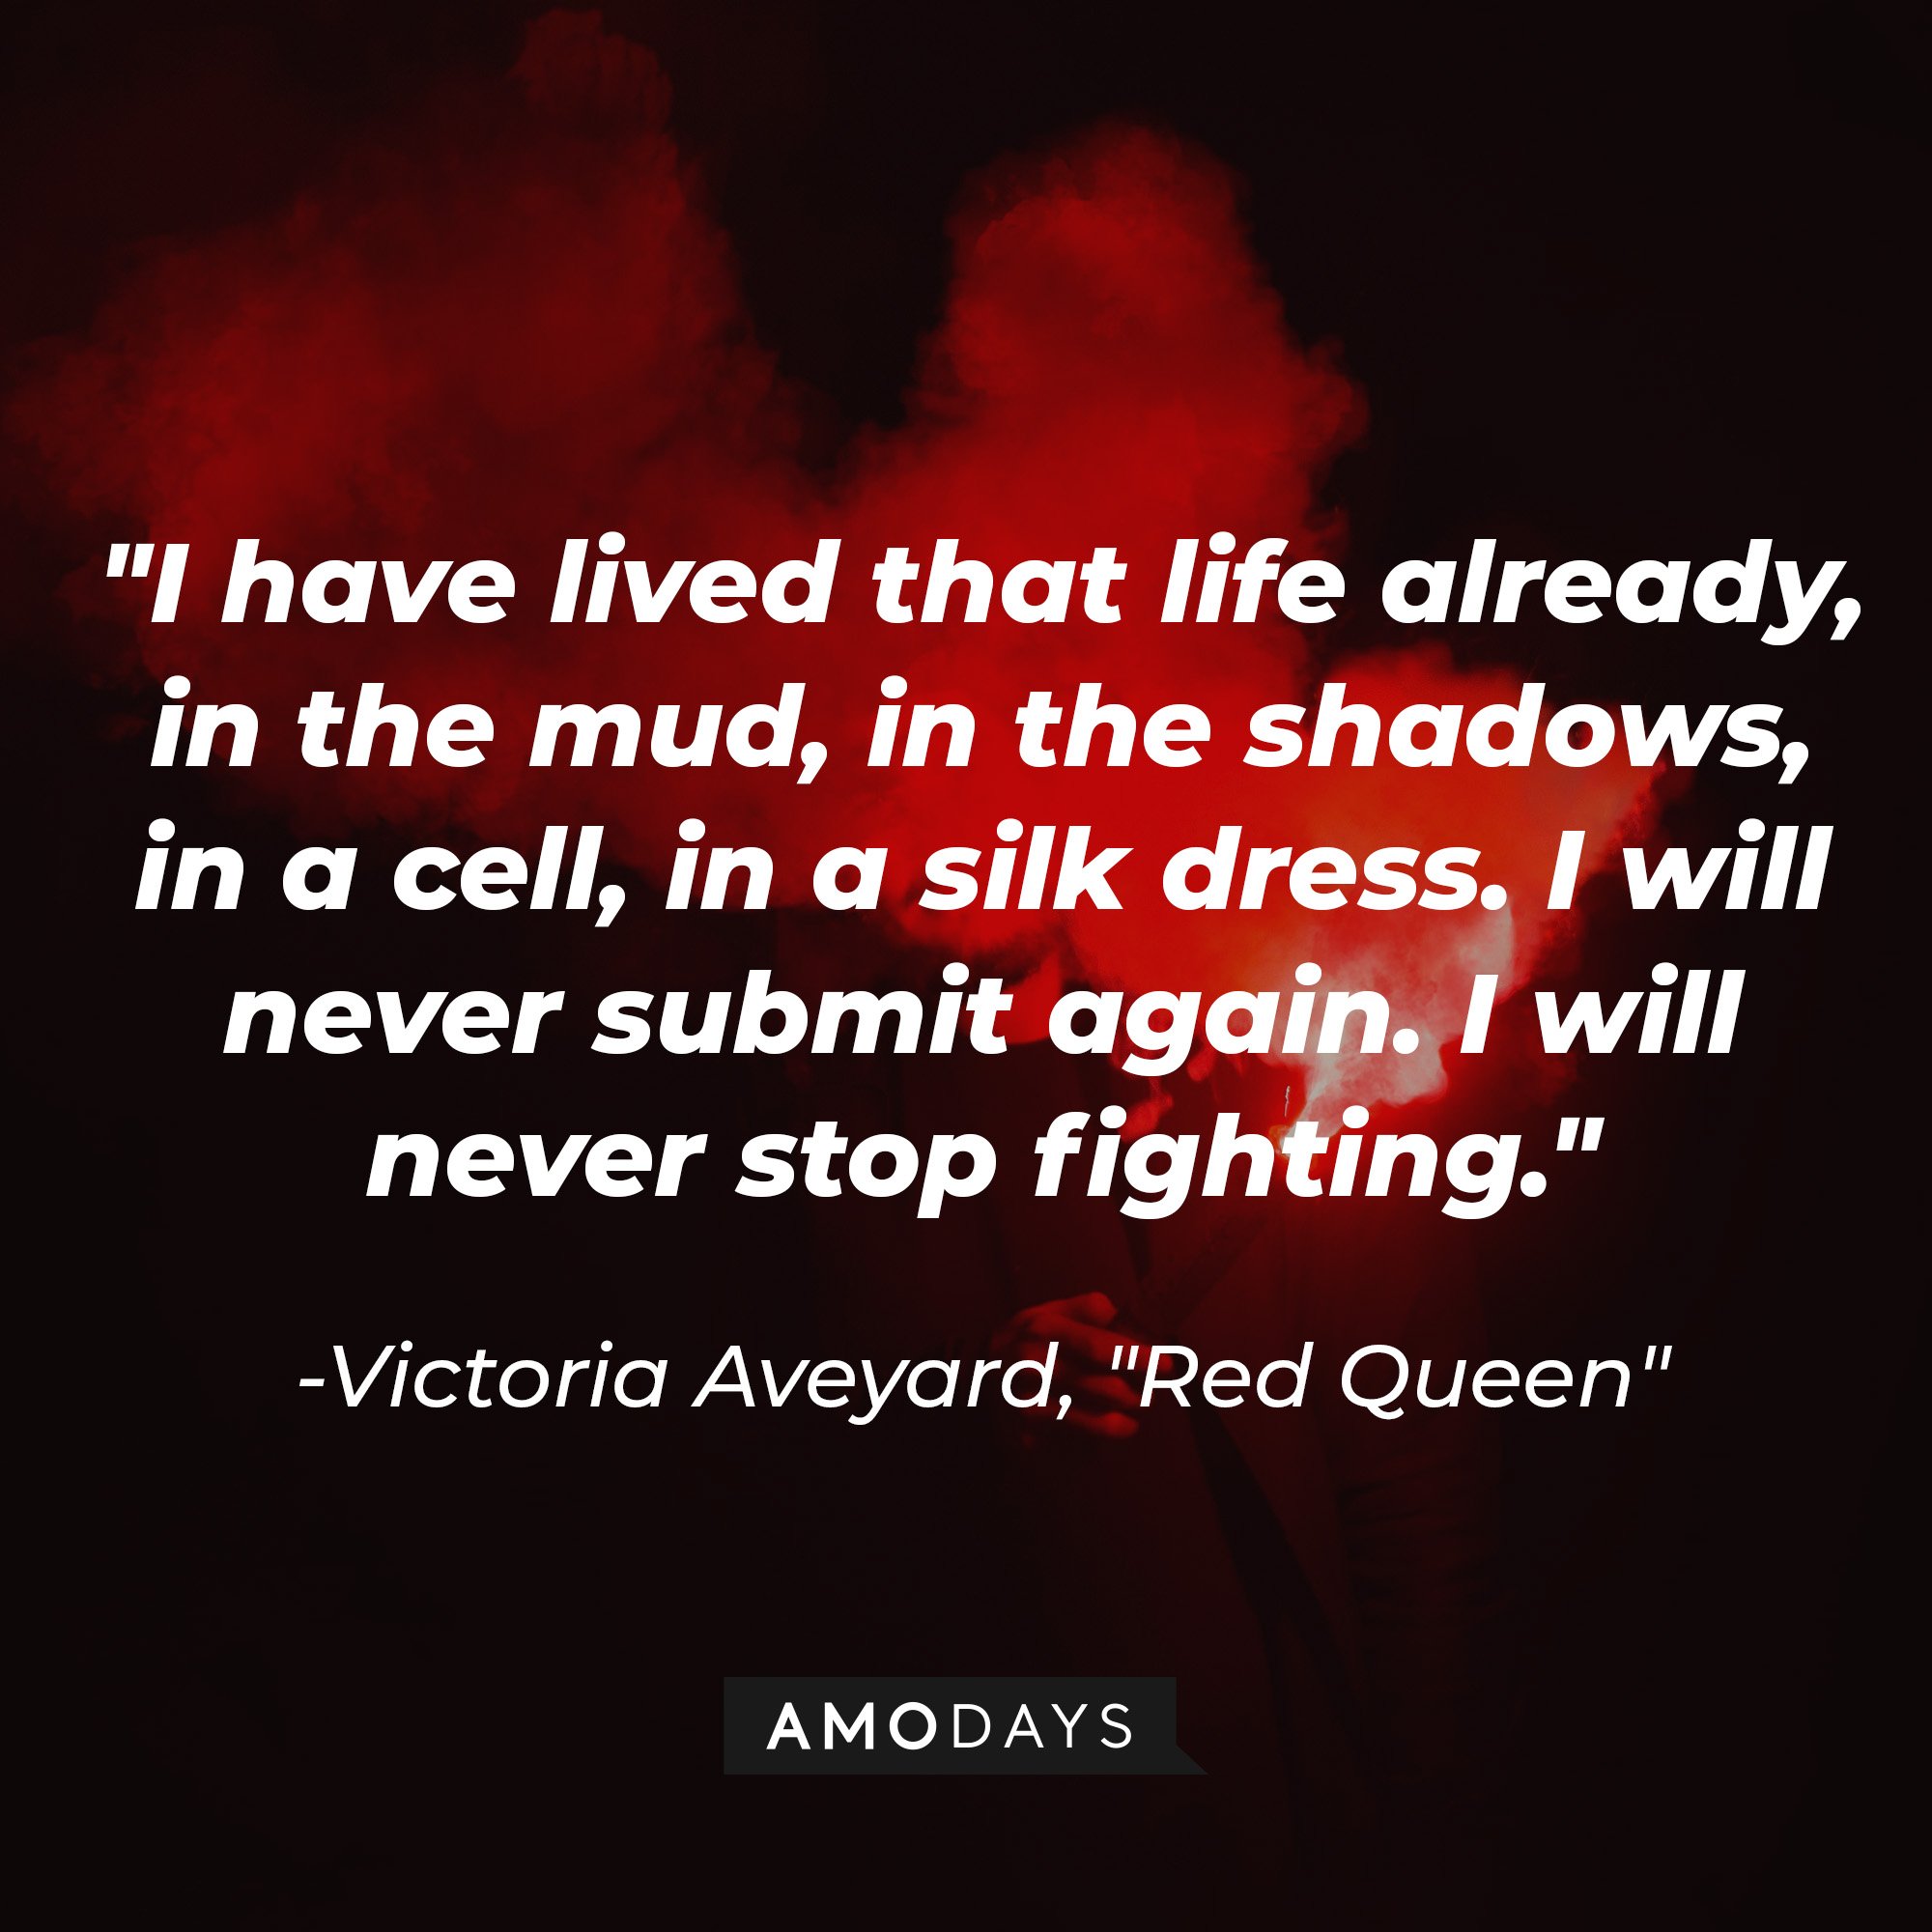 Victoria Aveyard’s quote in “Red Queen”: "I have lived that life already, in the mud, in the shadows, in a cell, in a silk dress. I will never submit again. I will never stop fighting." | Image: AmoDays